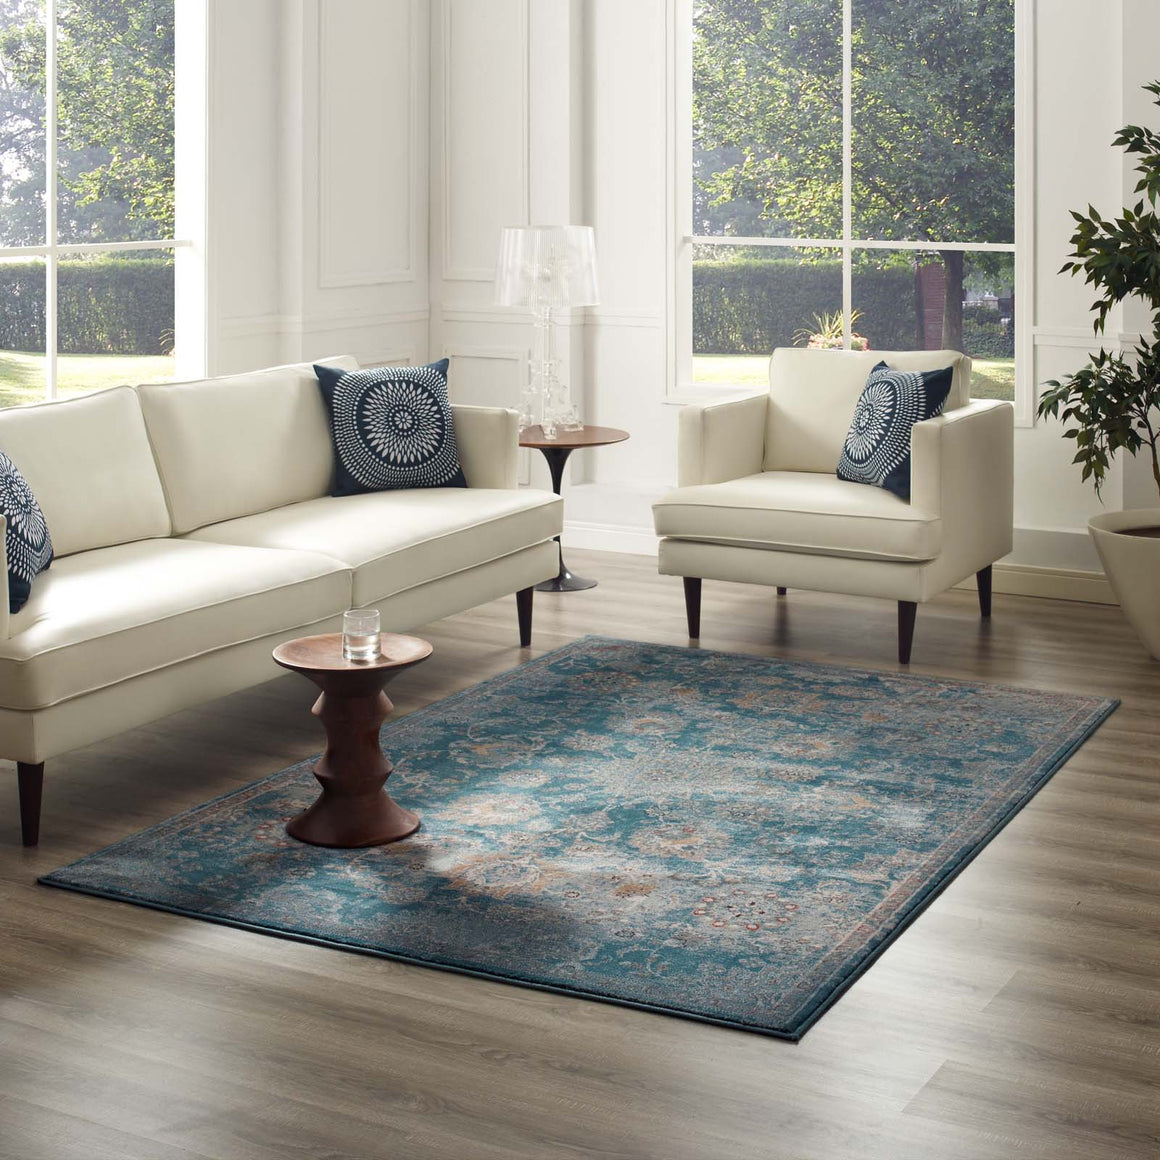 Cynara Distressed Floral Persian Medallion 5x8 Area Rug  Silver Blue, Teal and Beige